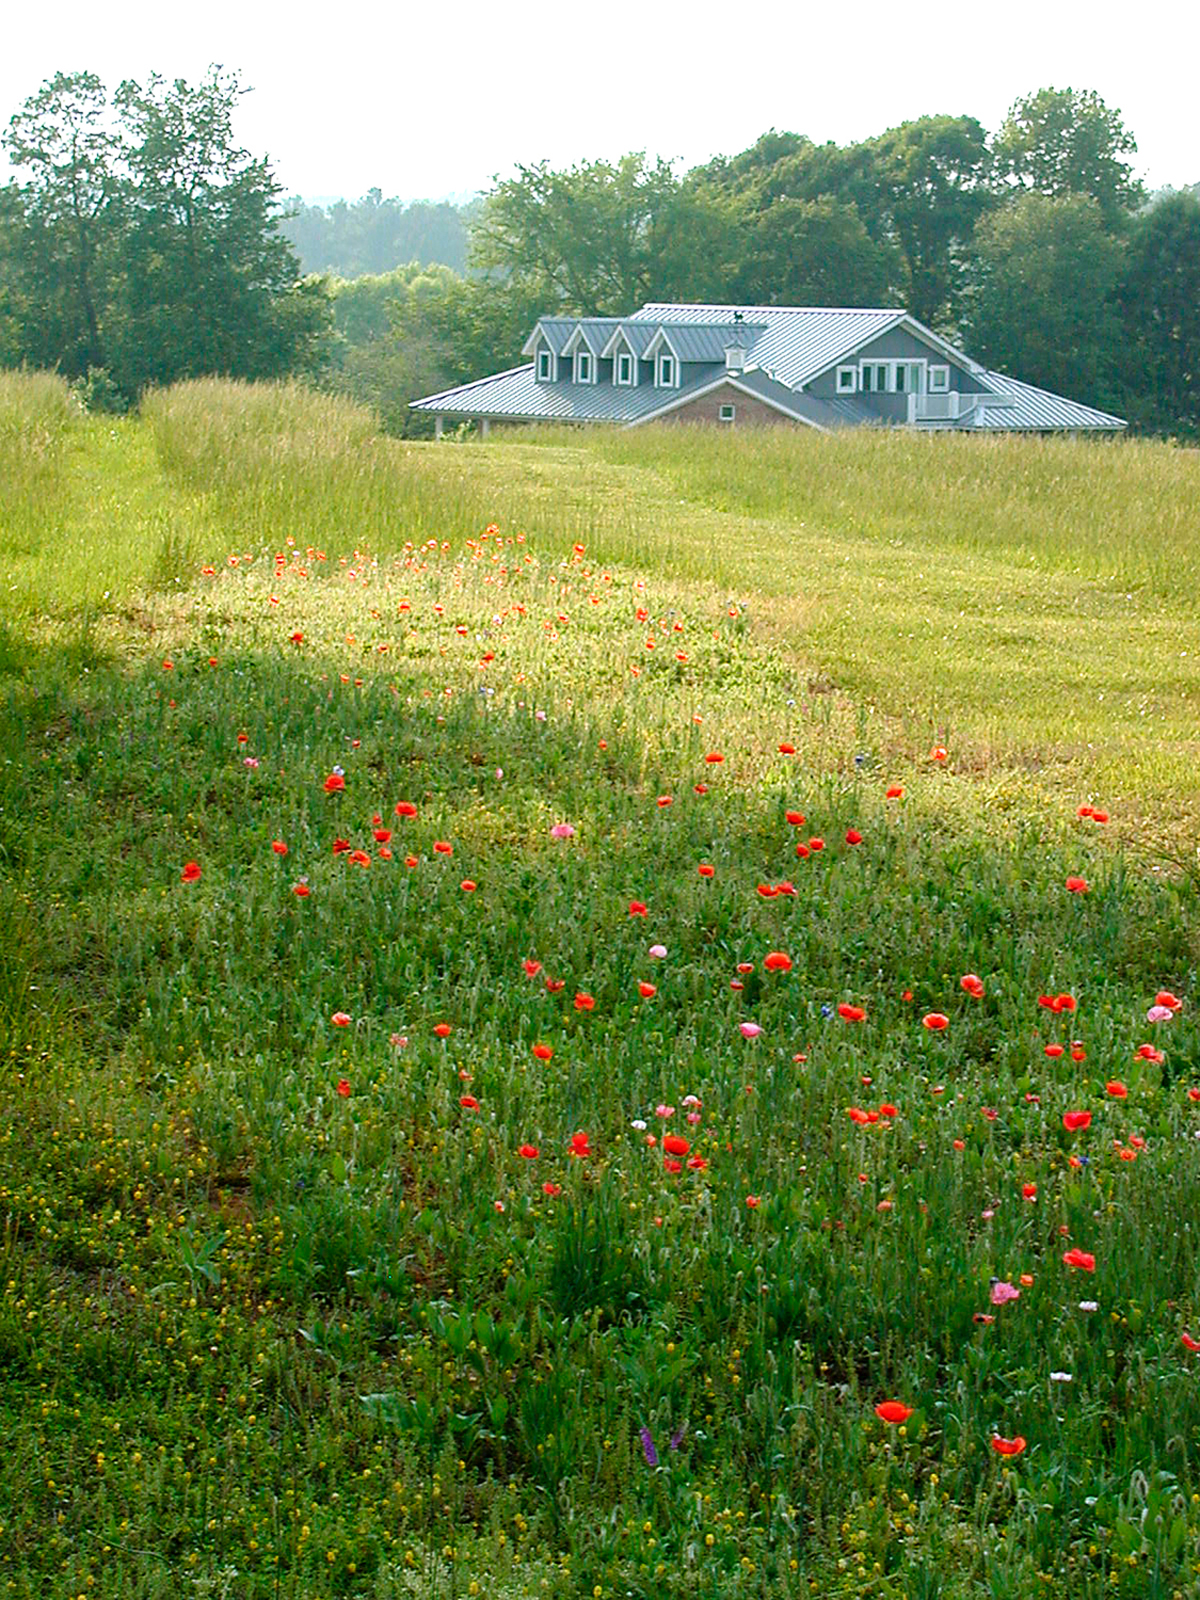 The top of the house visible from a grassy field blooming with red and pink flowers.